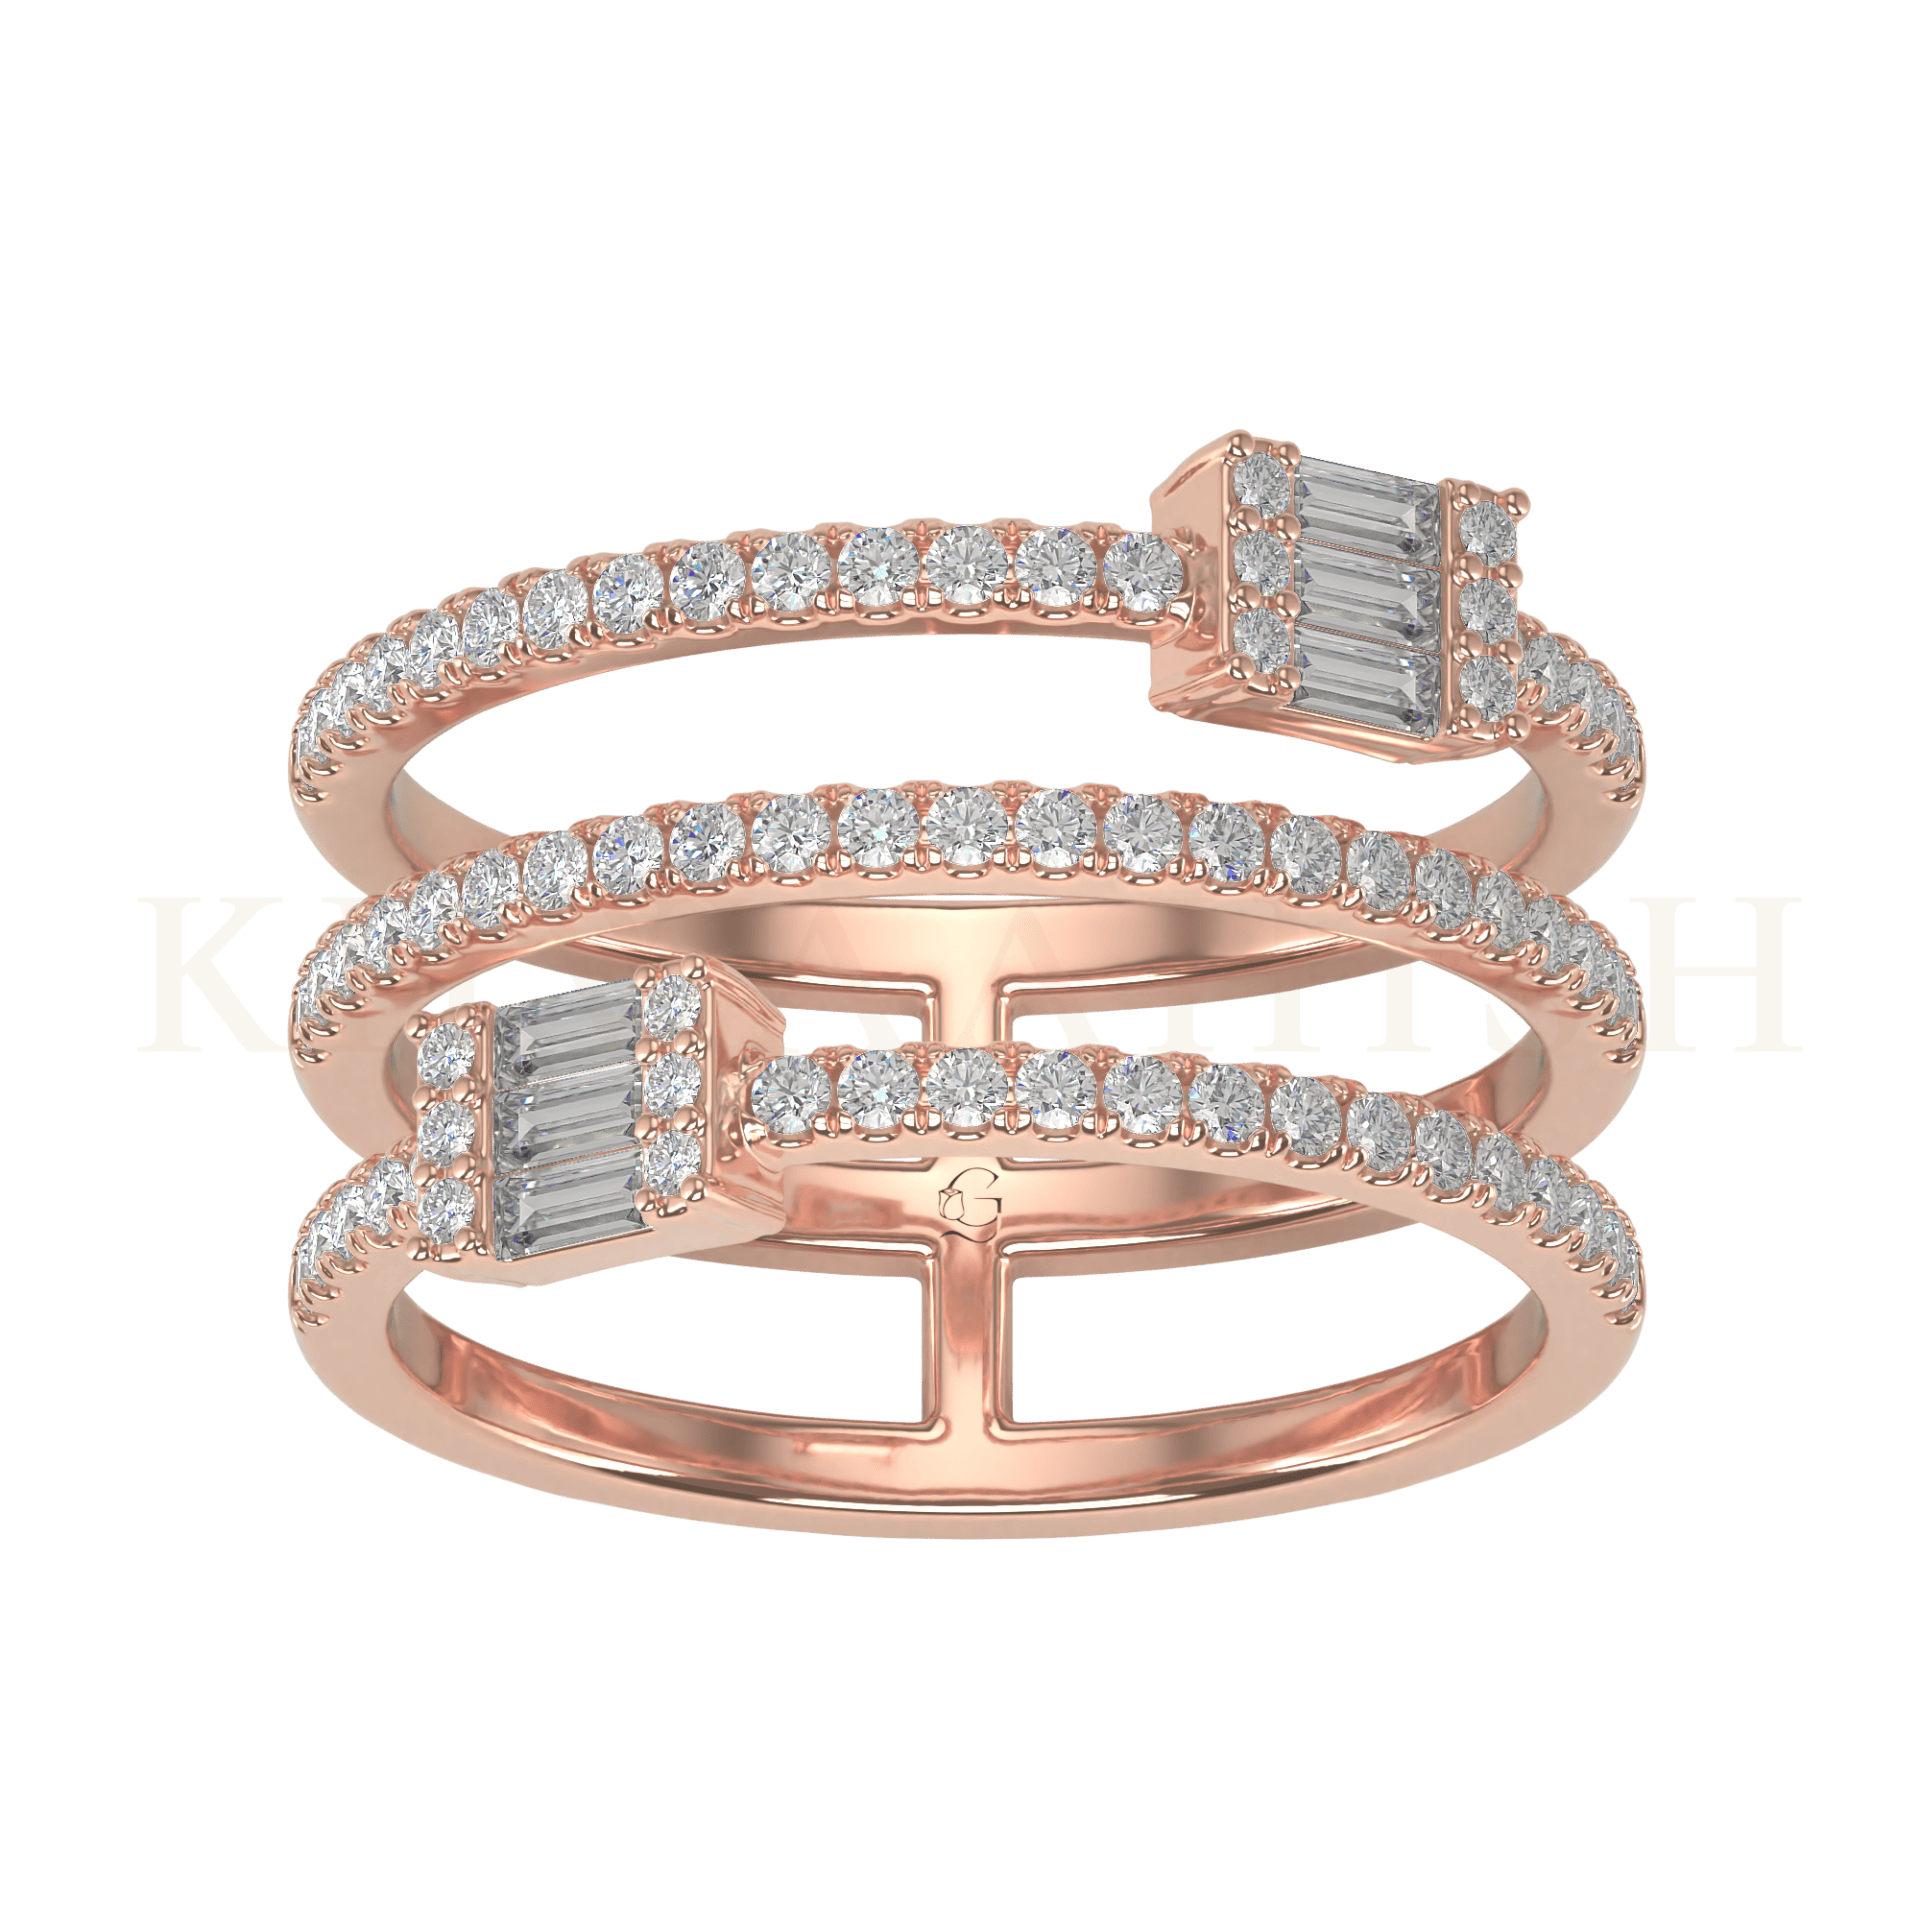 Top view of Radiating Elegance Diamond Band Ring  in rose gold.